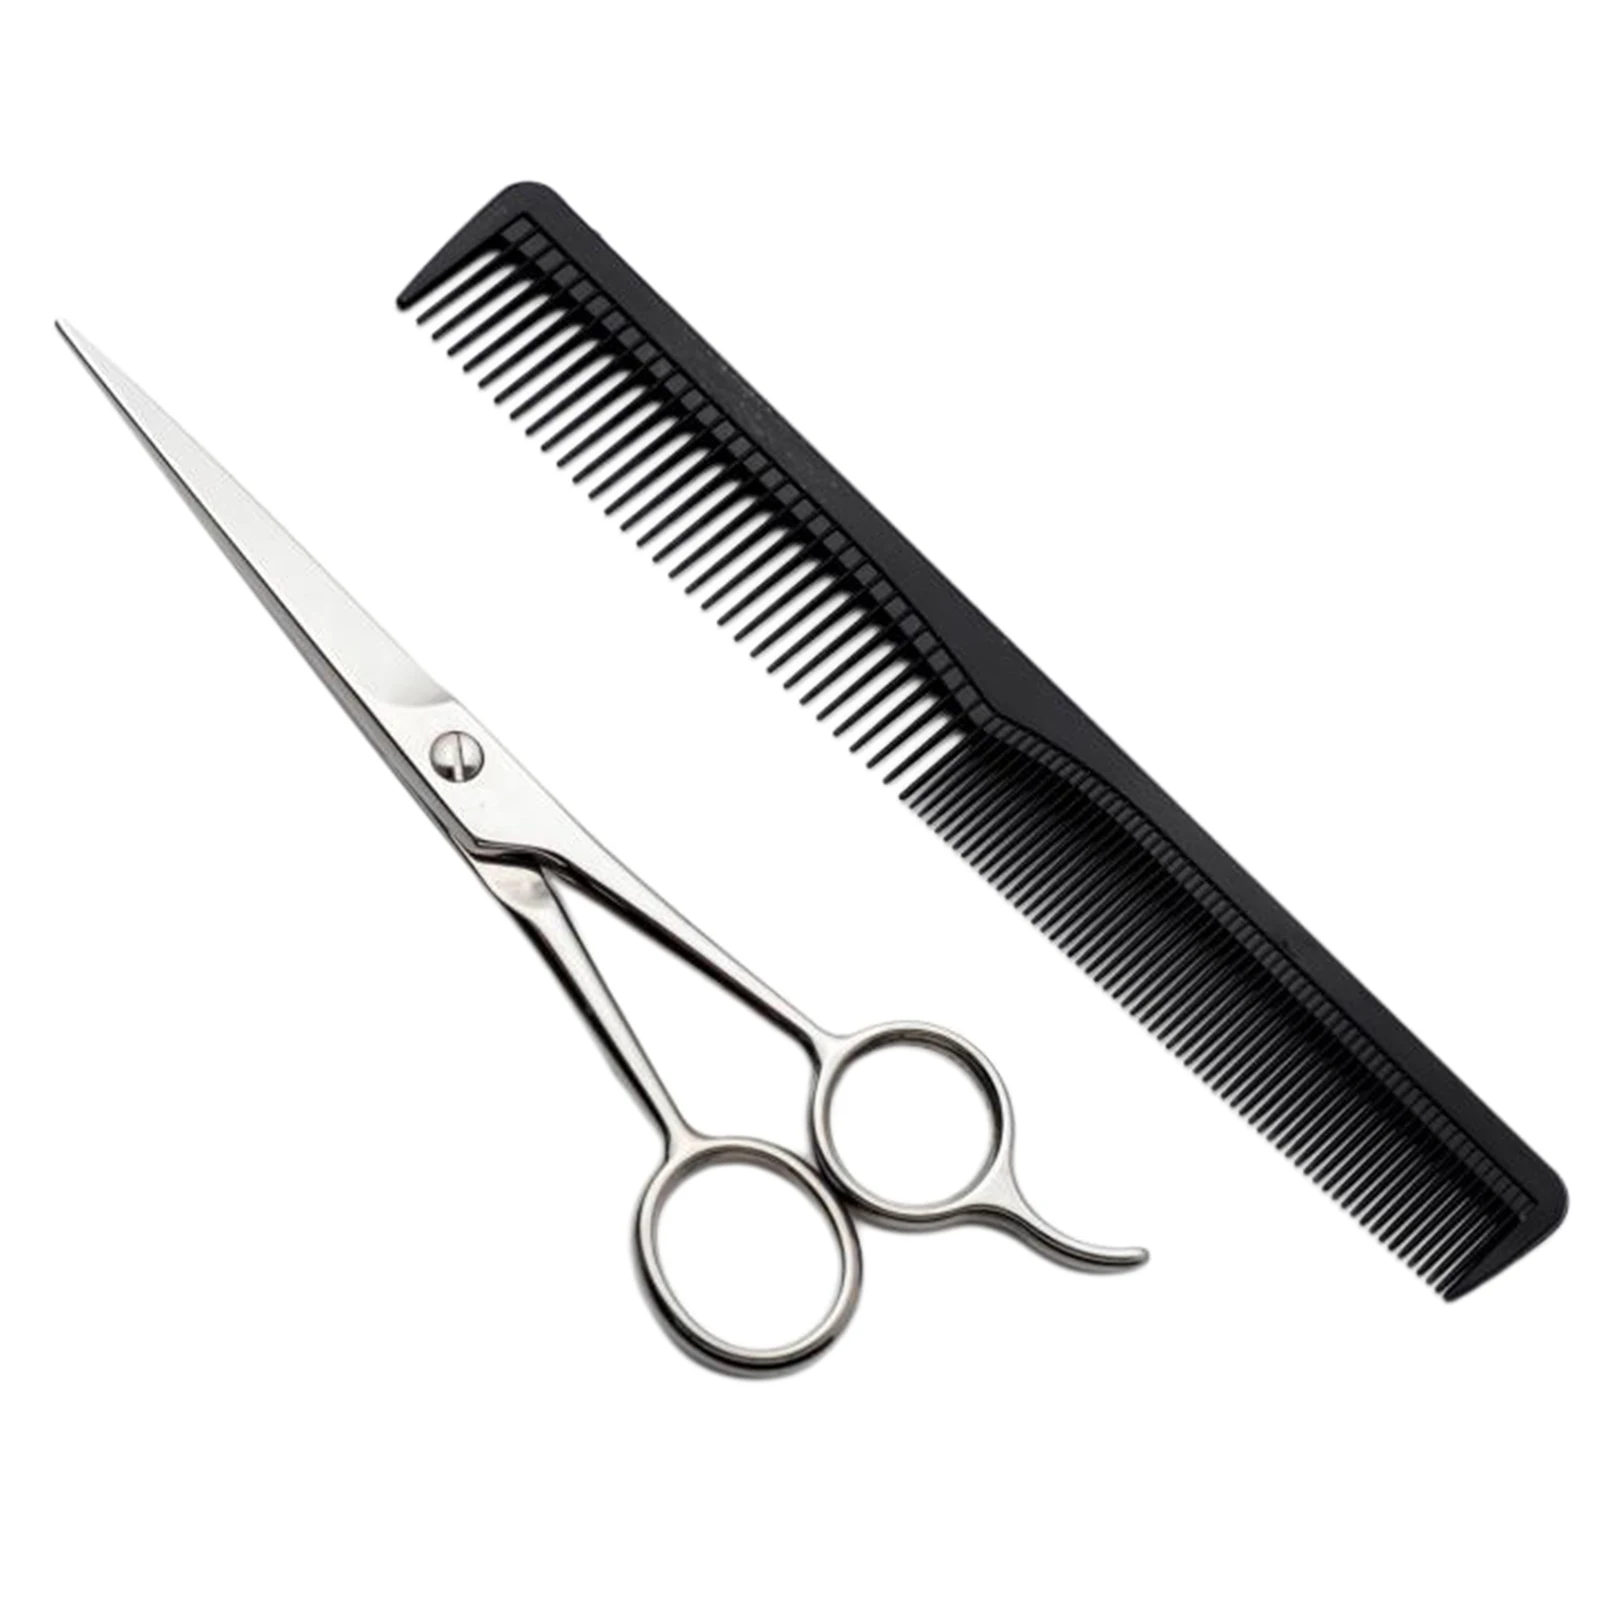 Barber Hair Cutting Scissors Stainless Steel Cutting Scissors Hairdressing Scissors Scissors for Cutting Thinning Hair Comb